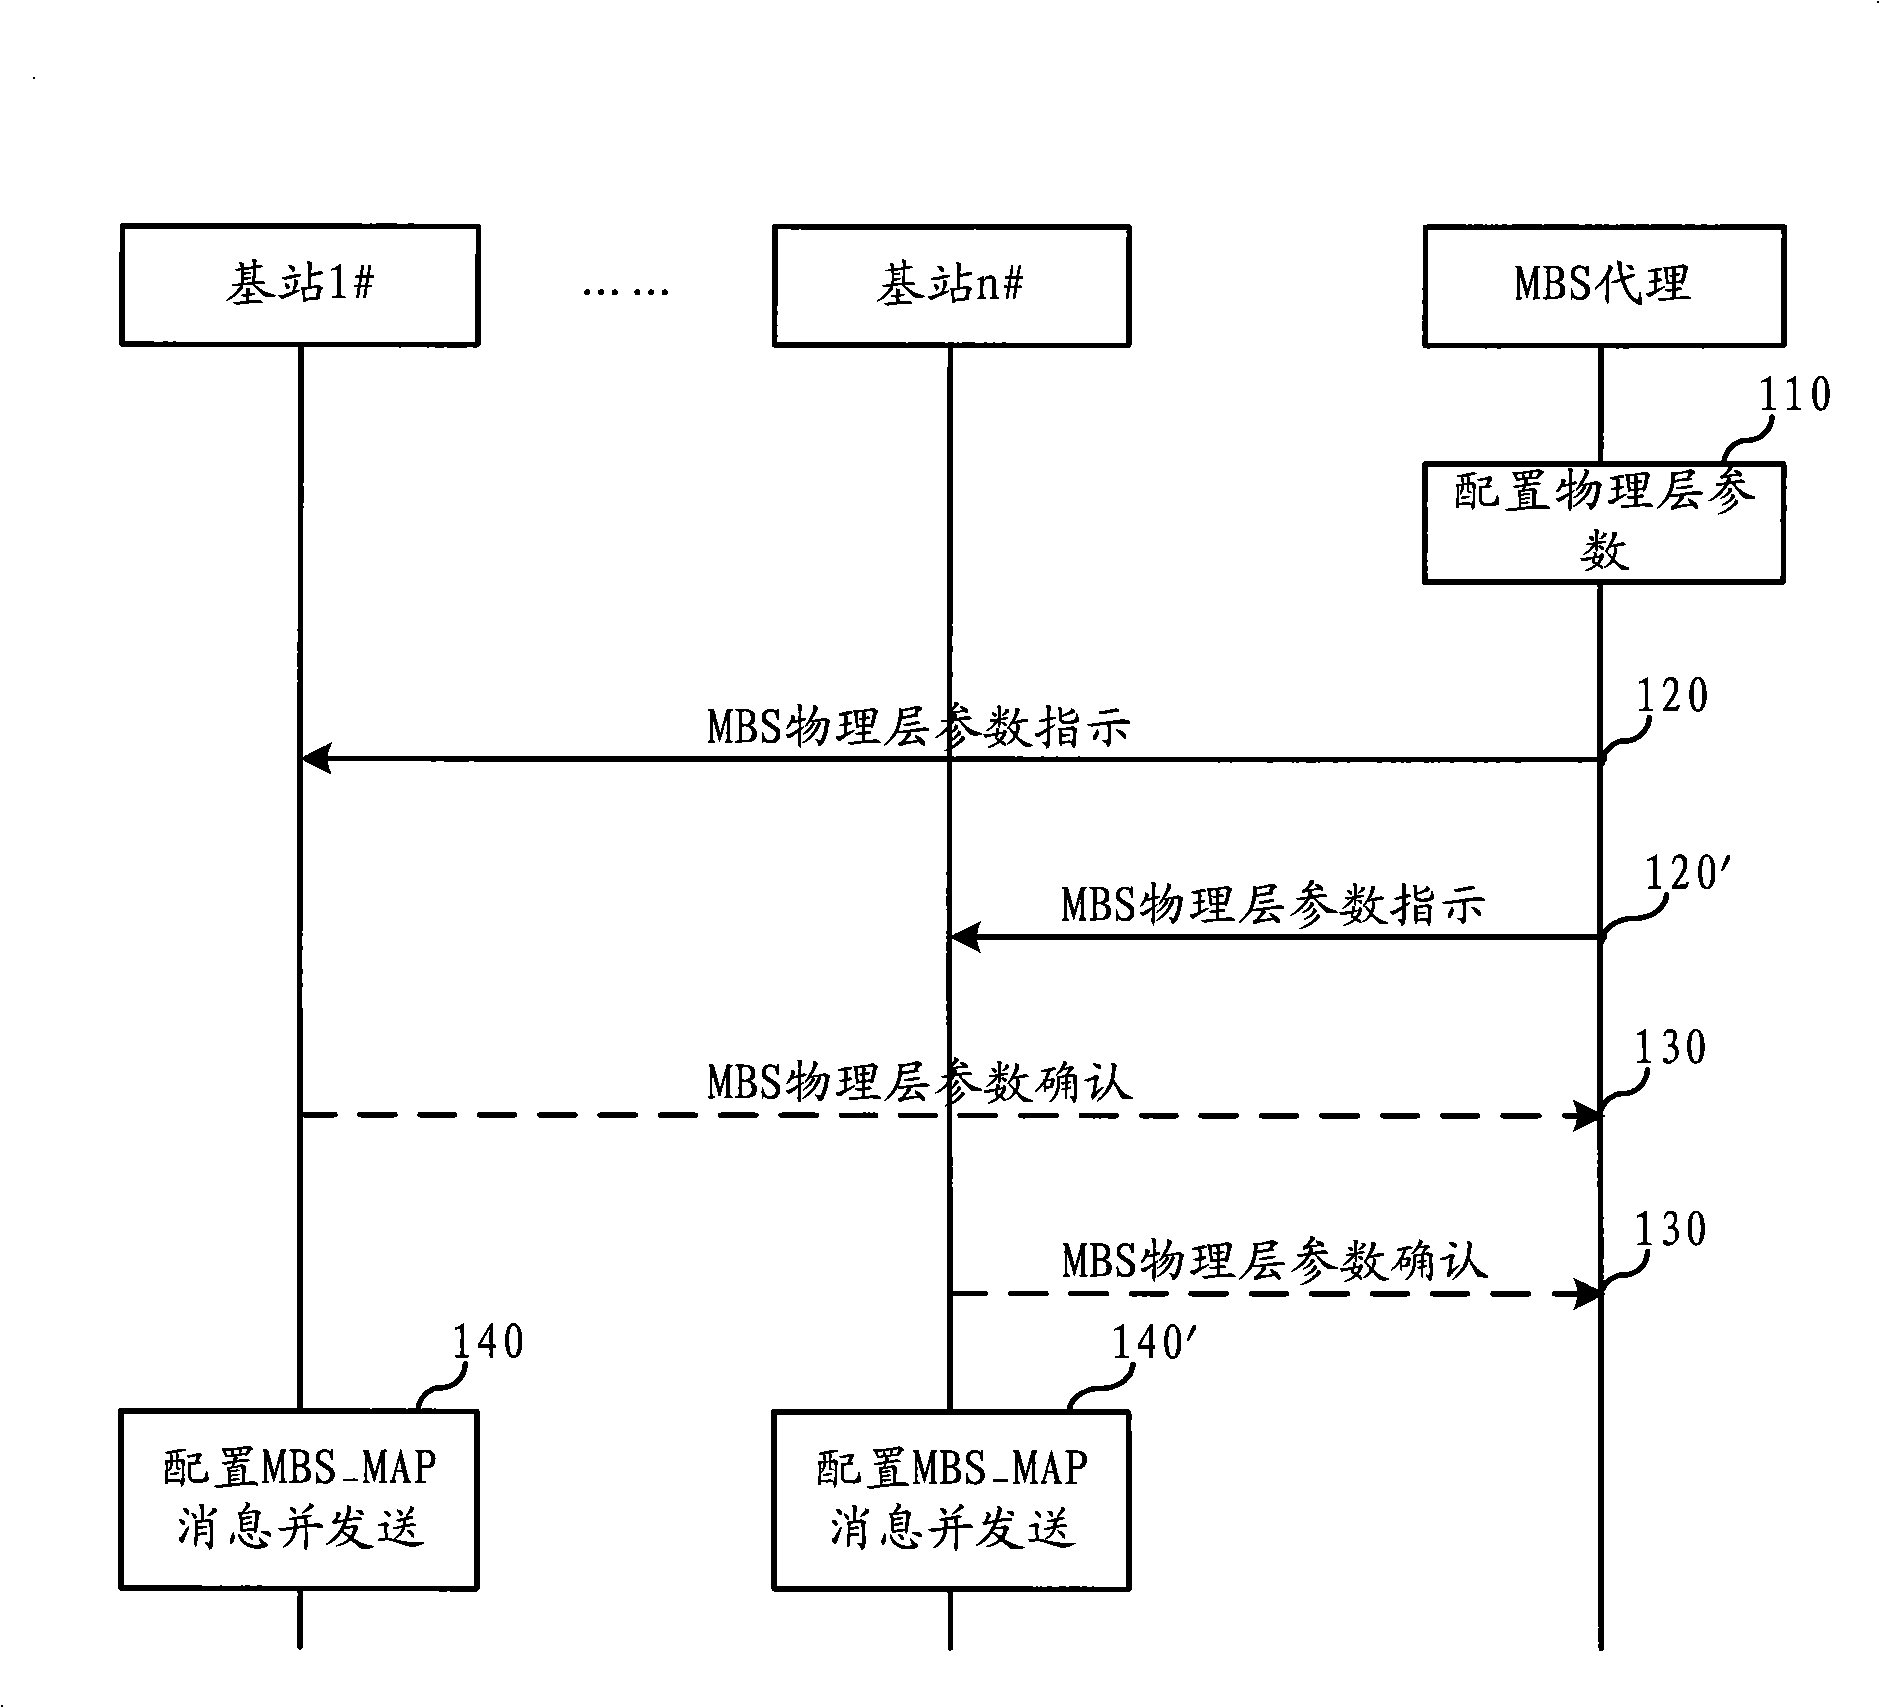 Method for collocating and receiving multi-broadcast service mapping message and its unit